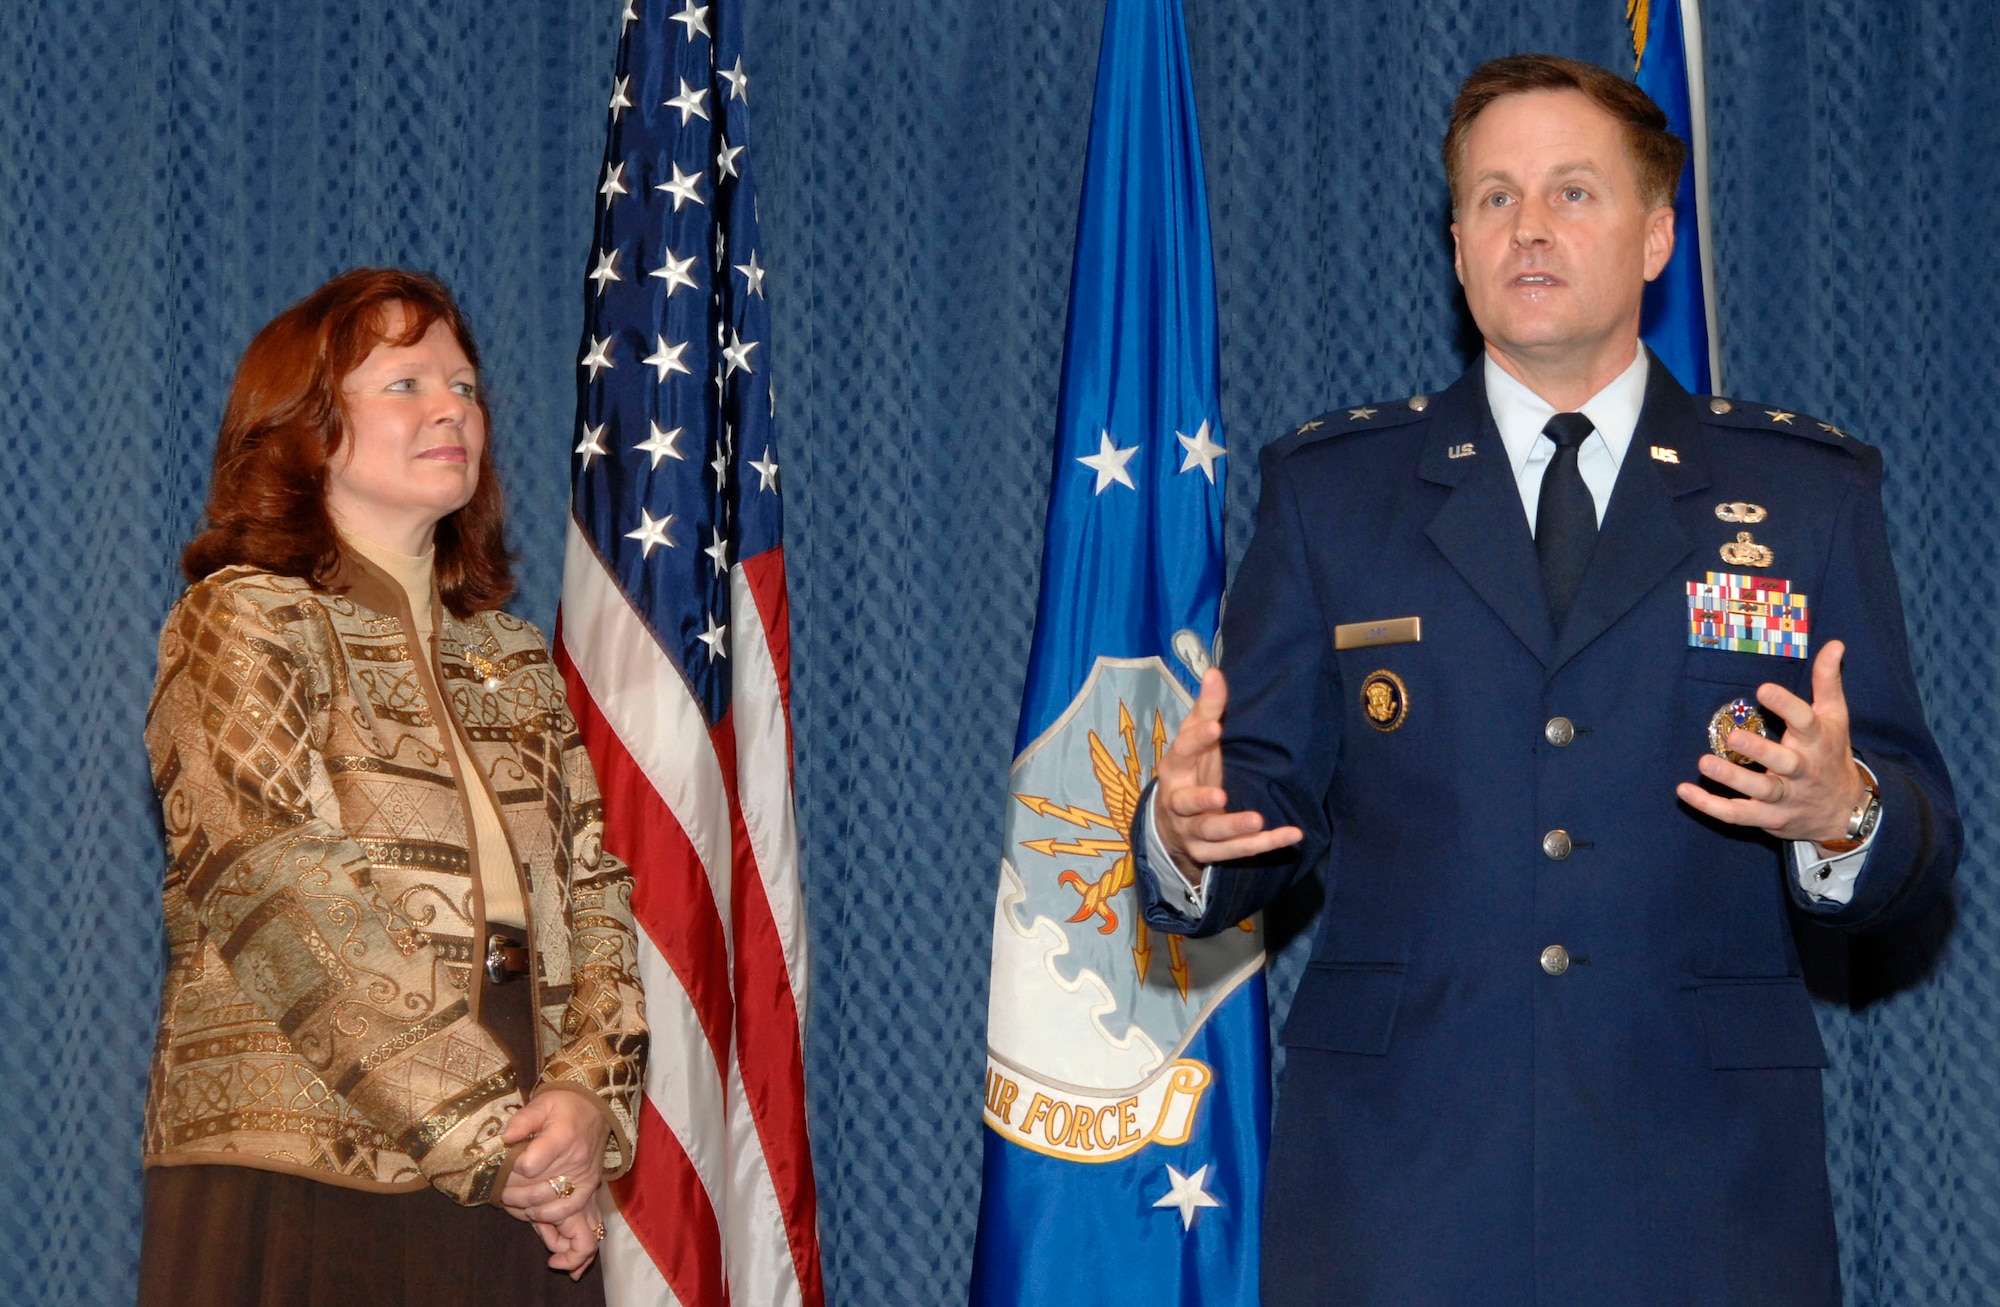 Maj. Gen. William T. Lord makes a few remarks after he and his wife, Cynthia, received the O'Malley Award from Air Force Chief of Staff Gen. T. Michael Moseley Nov. 15 at the Pentagon. The award is given to the wing commander and spouse who were the most involved in their community. General Lord was the base commander at Keesler Air Force Base, Miss., where he dealt with four hurricanes, including Katrina and Rita, that devasted the Gulf Coast. (U.S. Air Force photo/Tech. Sgt. Cohen Young)